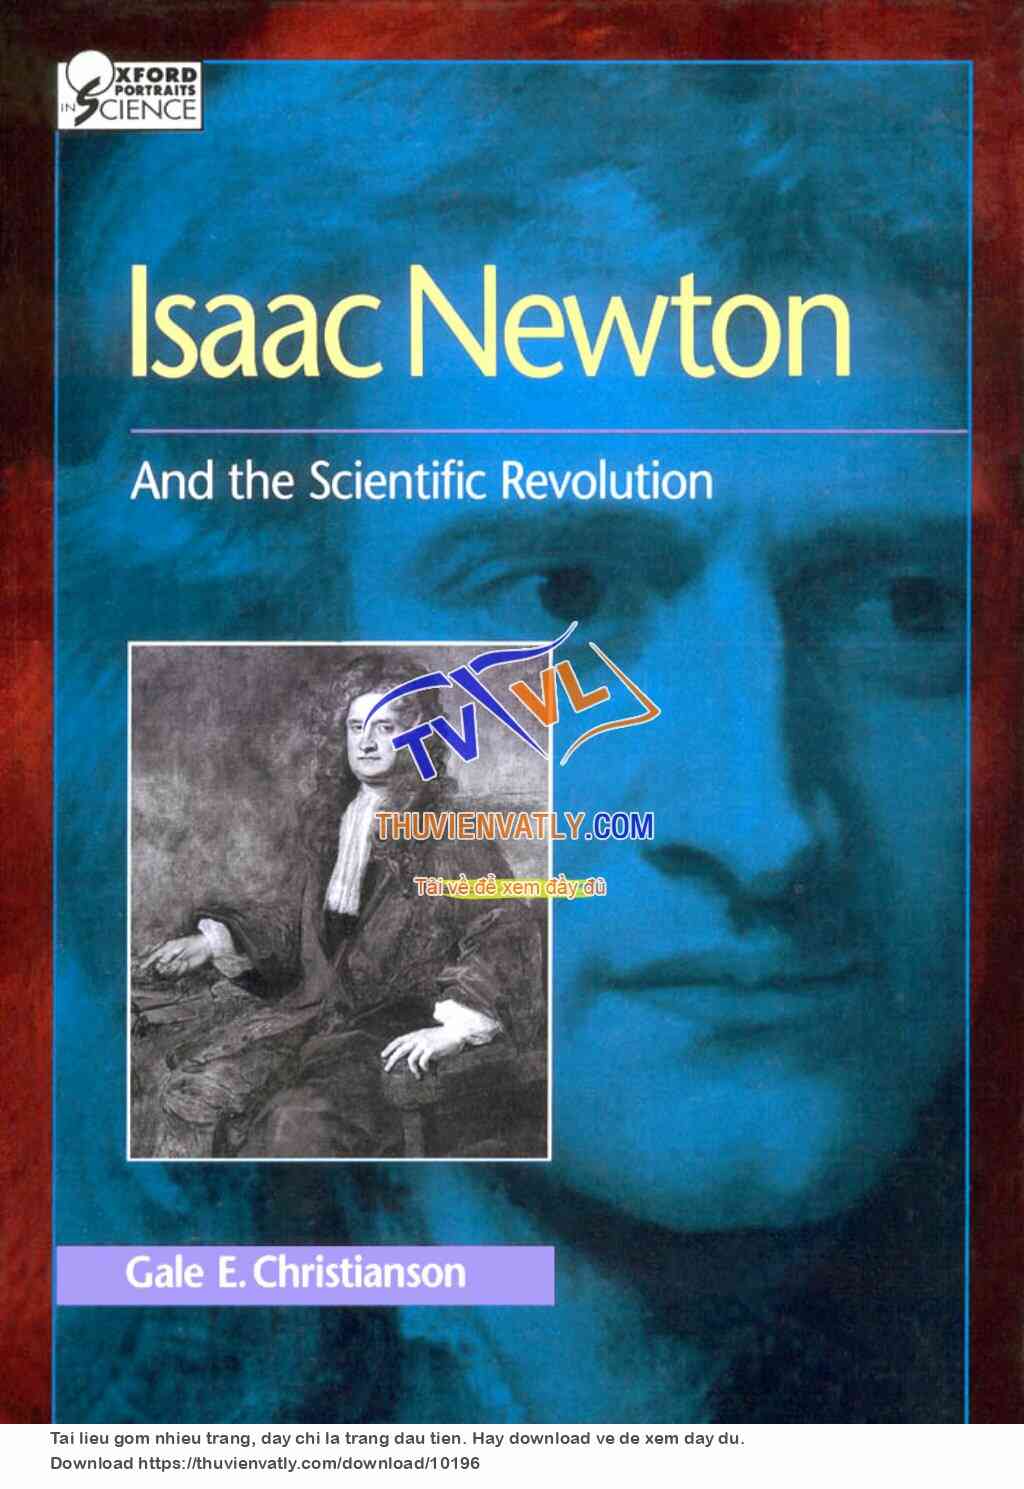 Isaac Newton And the Scientific Revolution